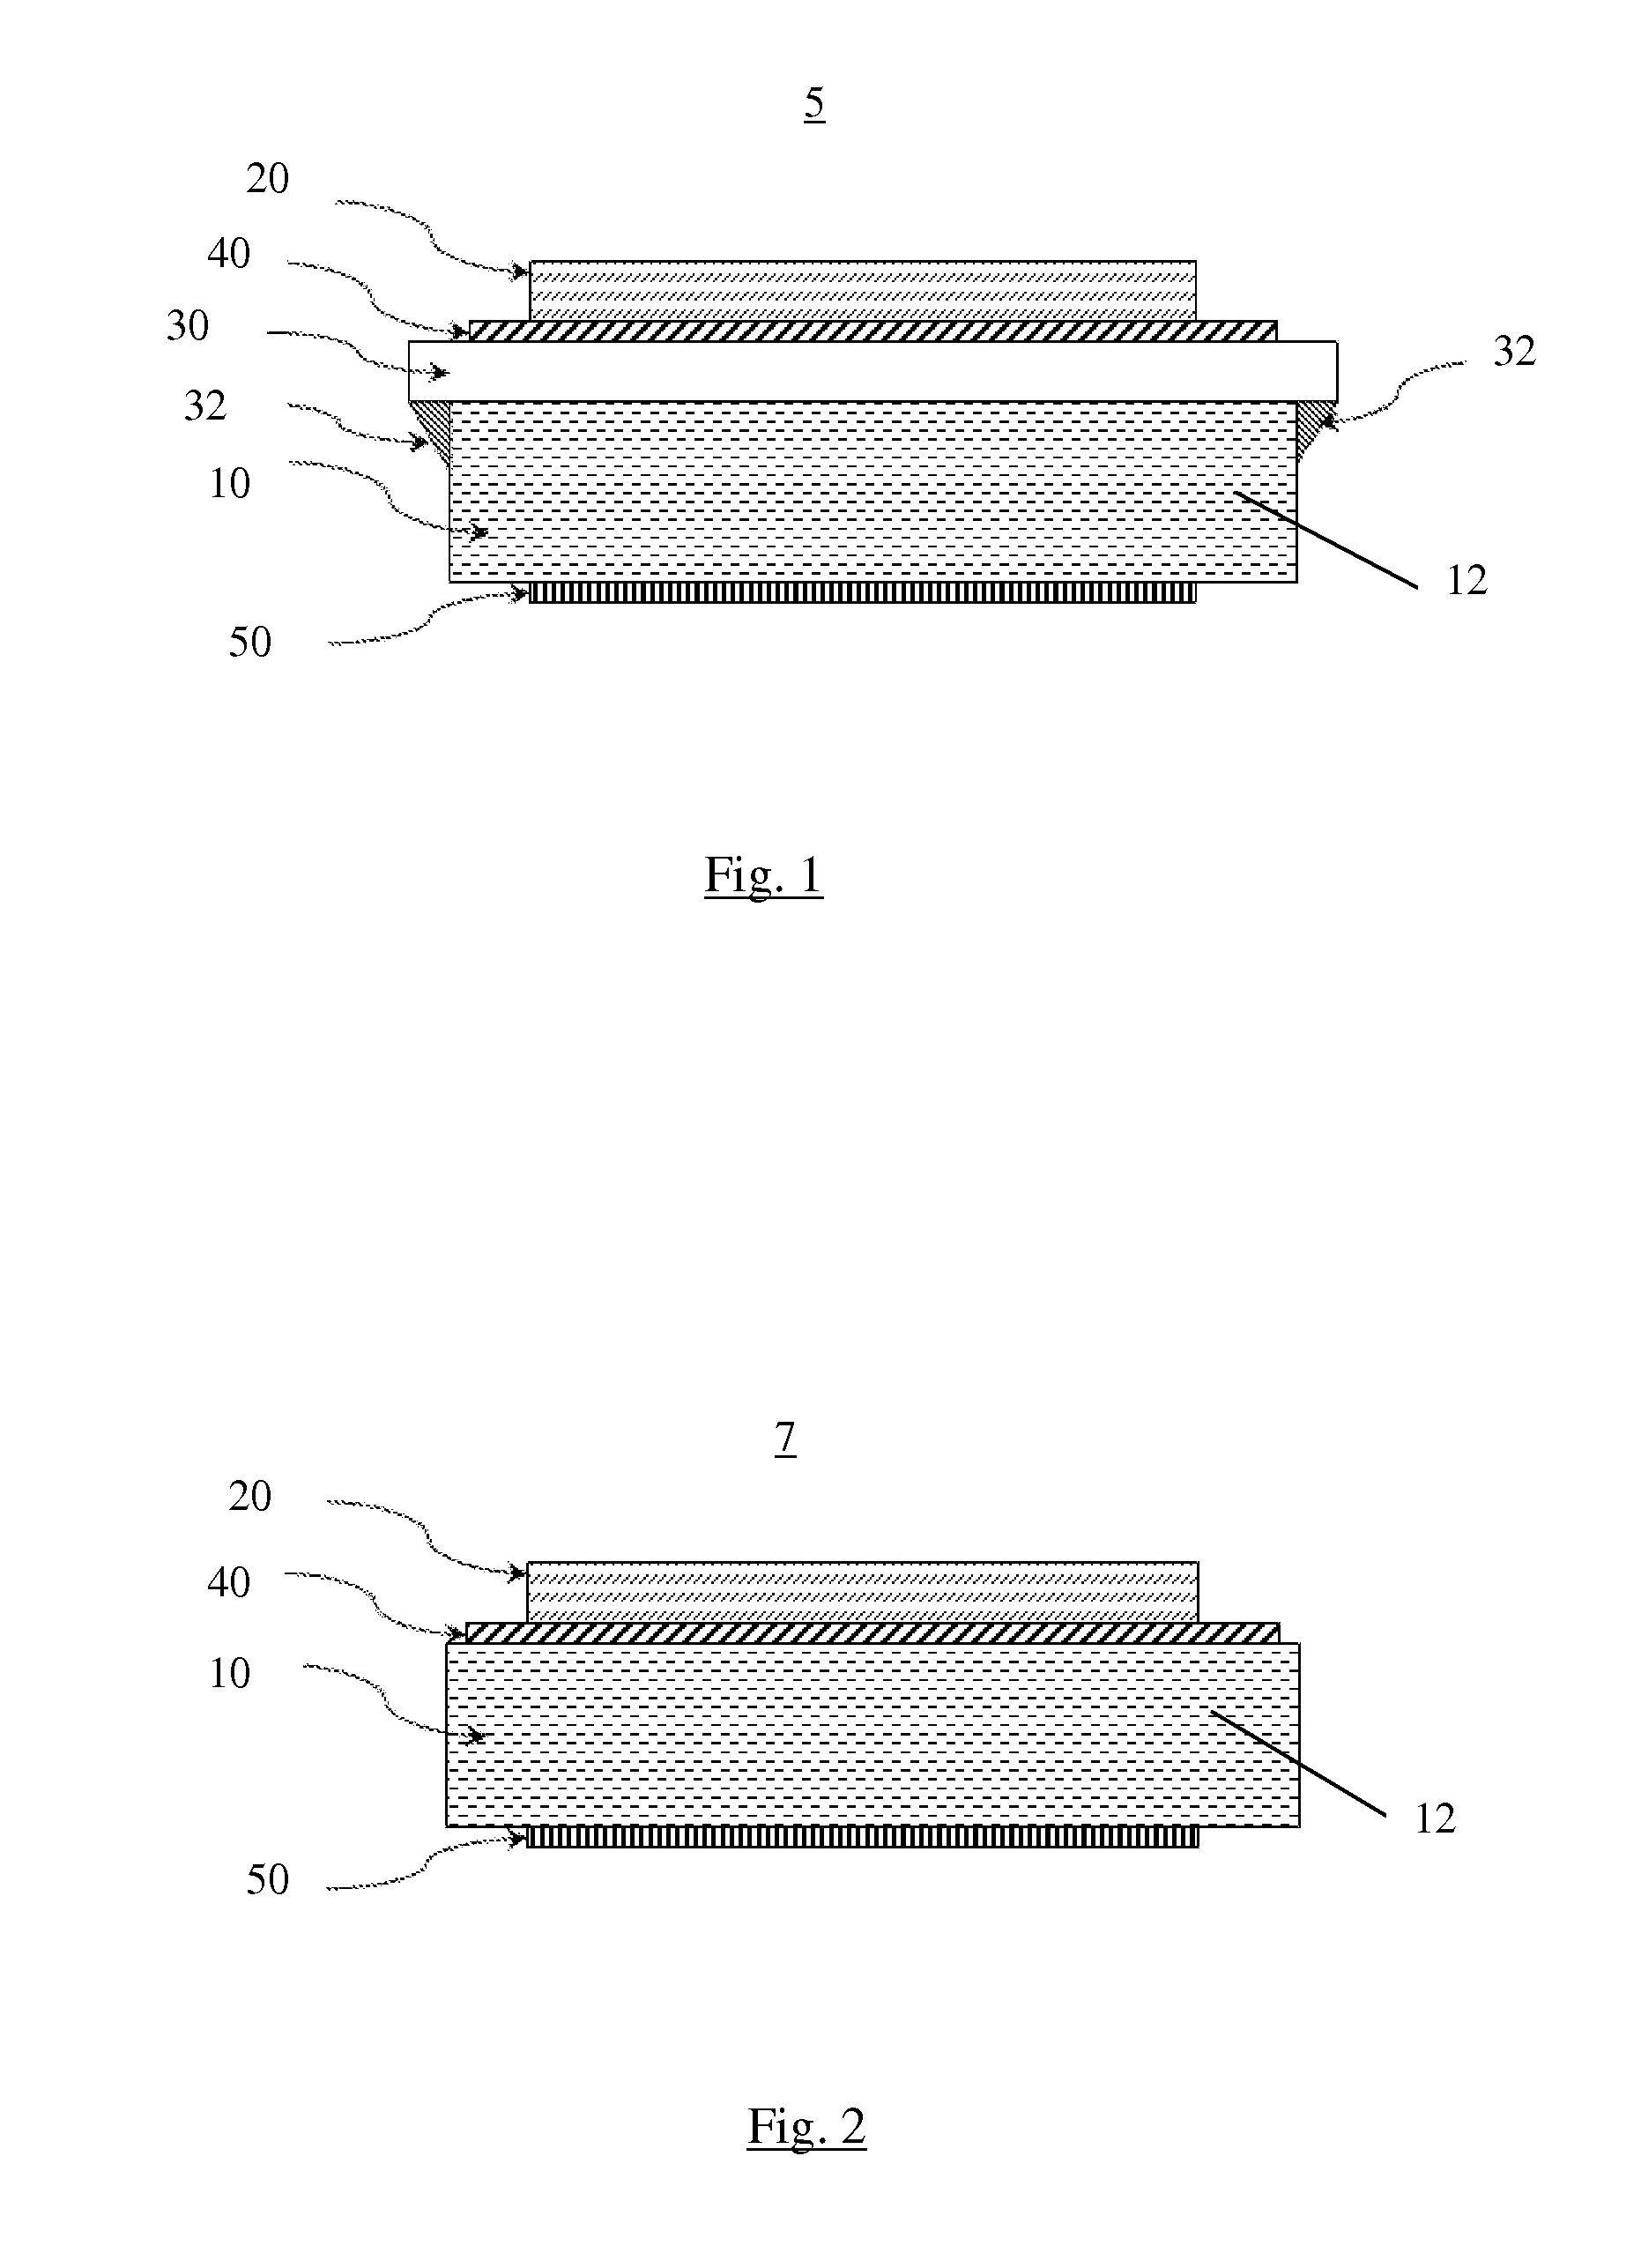 Electrochemical cell with sintered cathode and both solid and liquid electrolyte